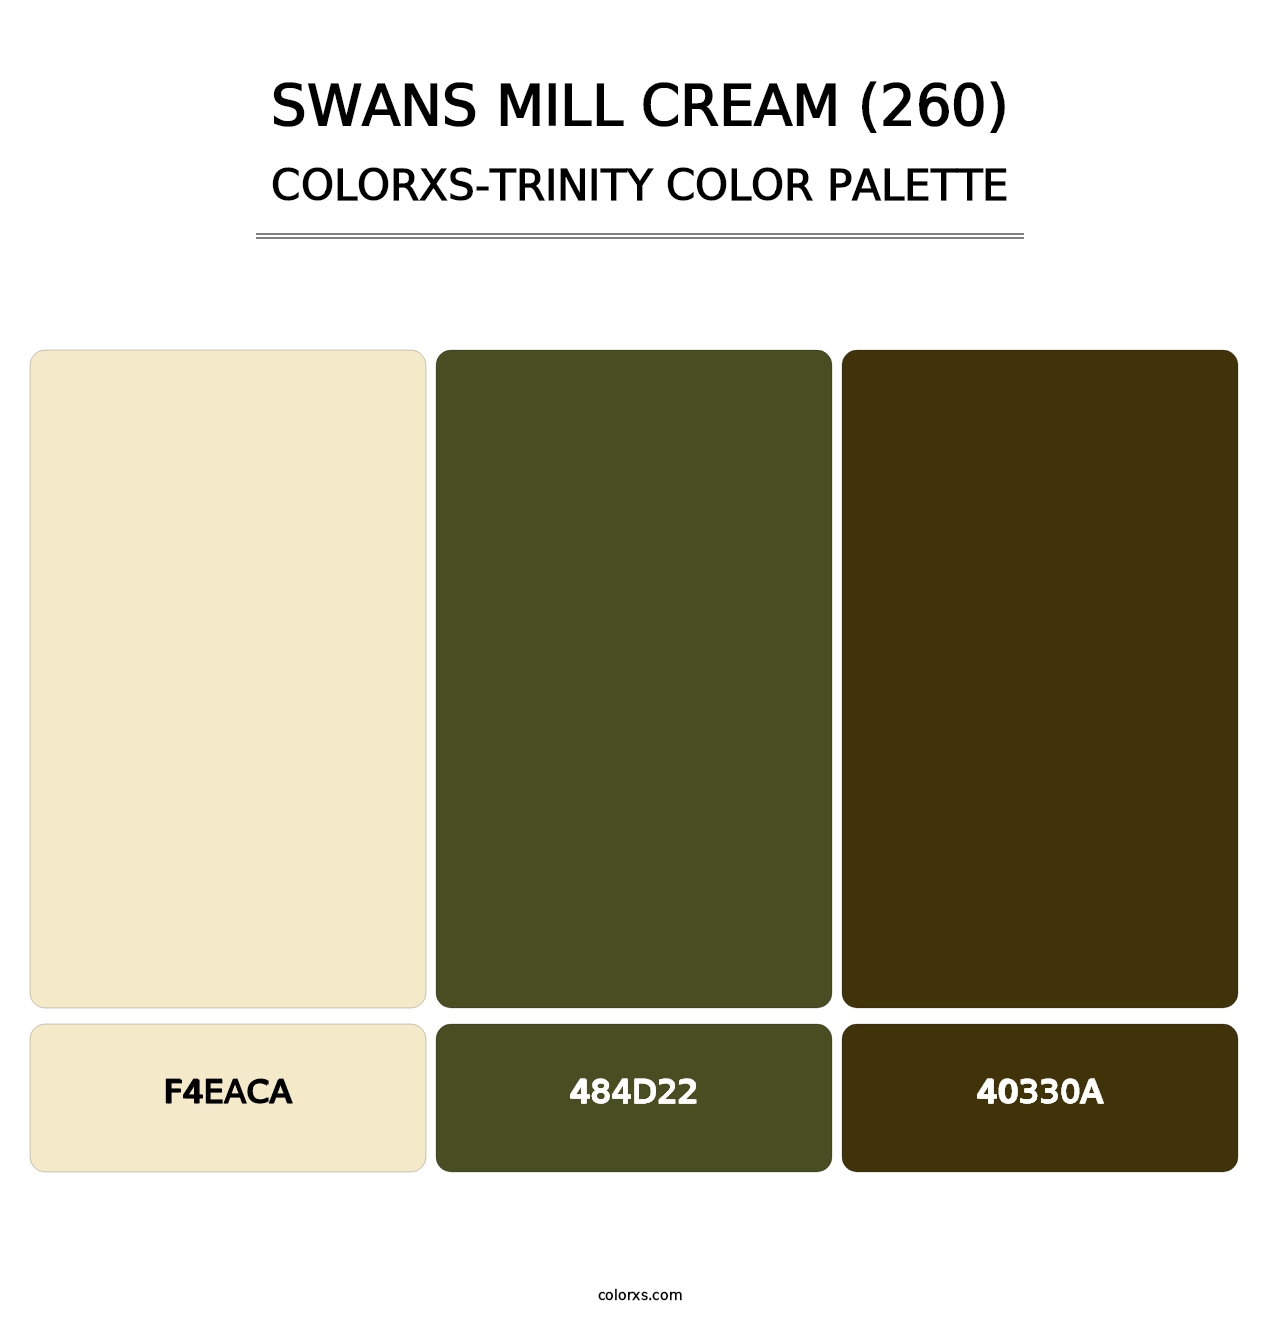 Swans Mill Cream (260) - Colorxs Trinity Palette